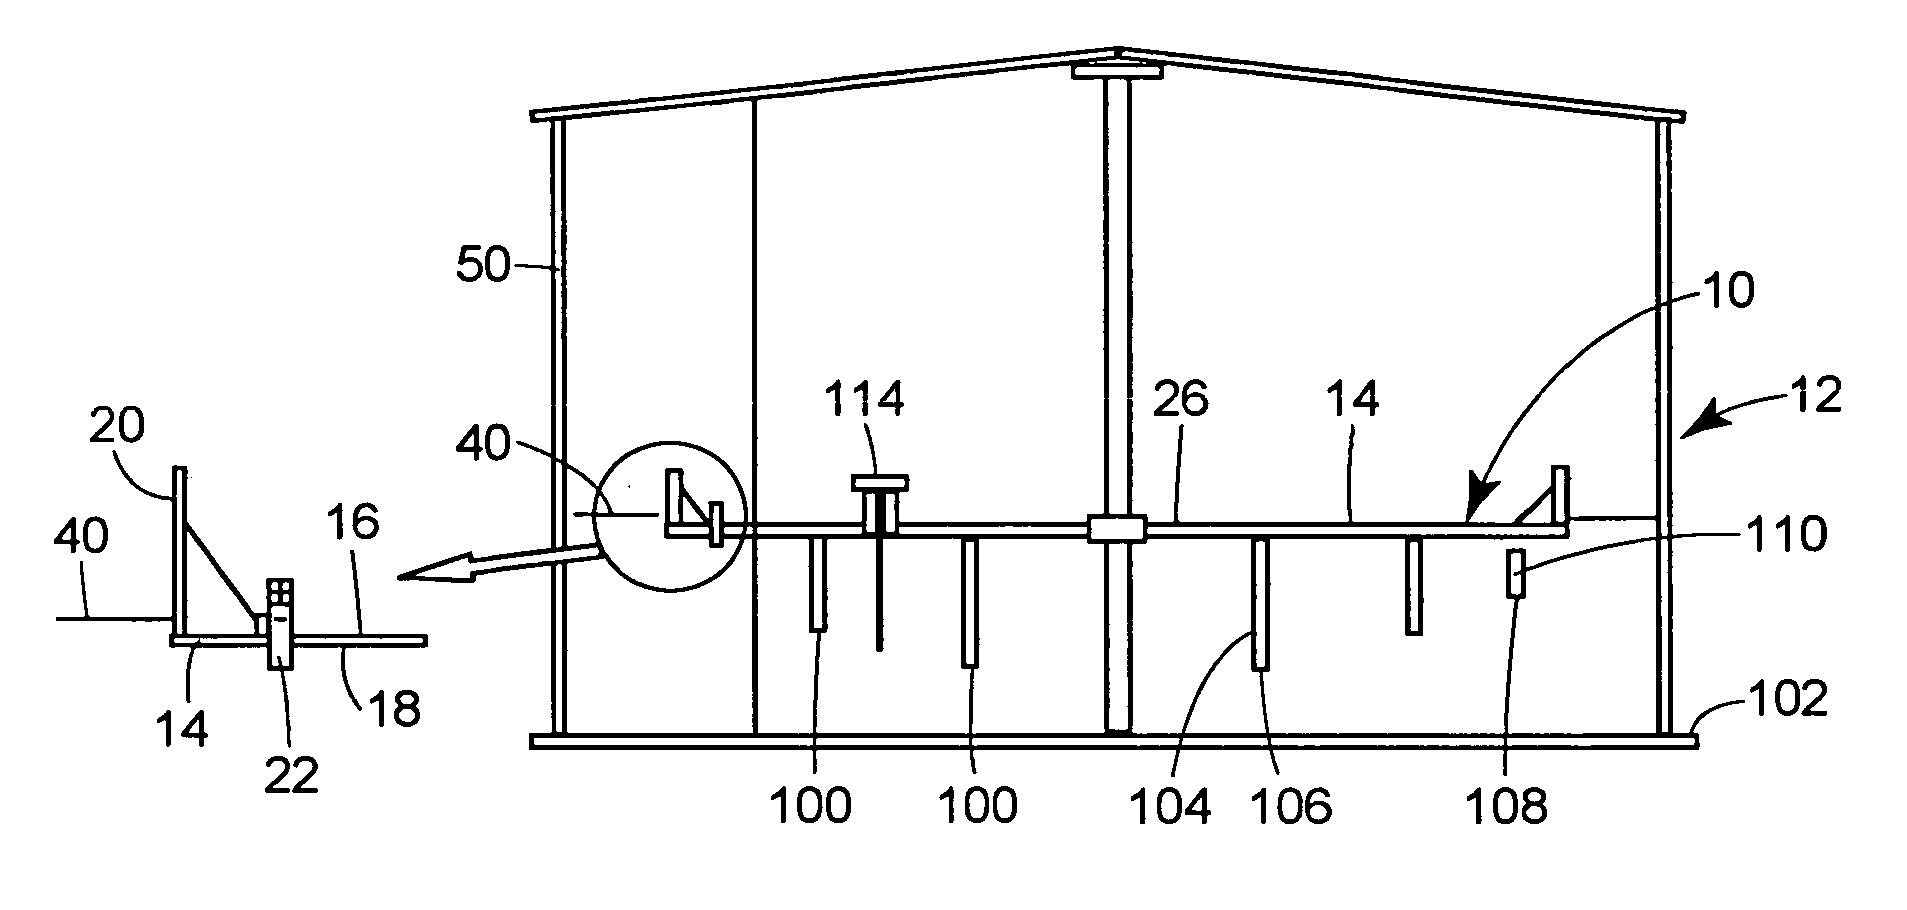 Storage tank with self-draining full-contact floating roof